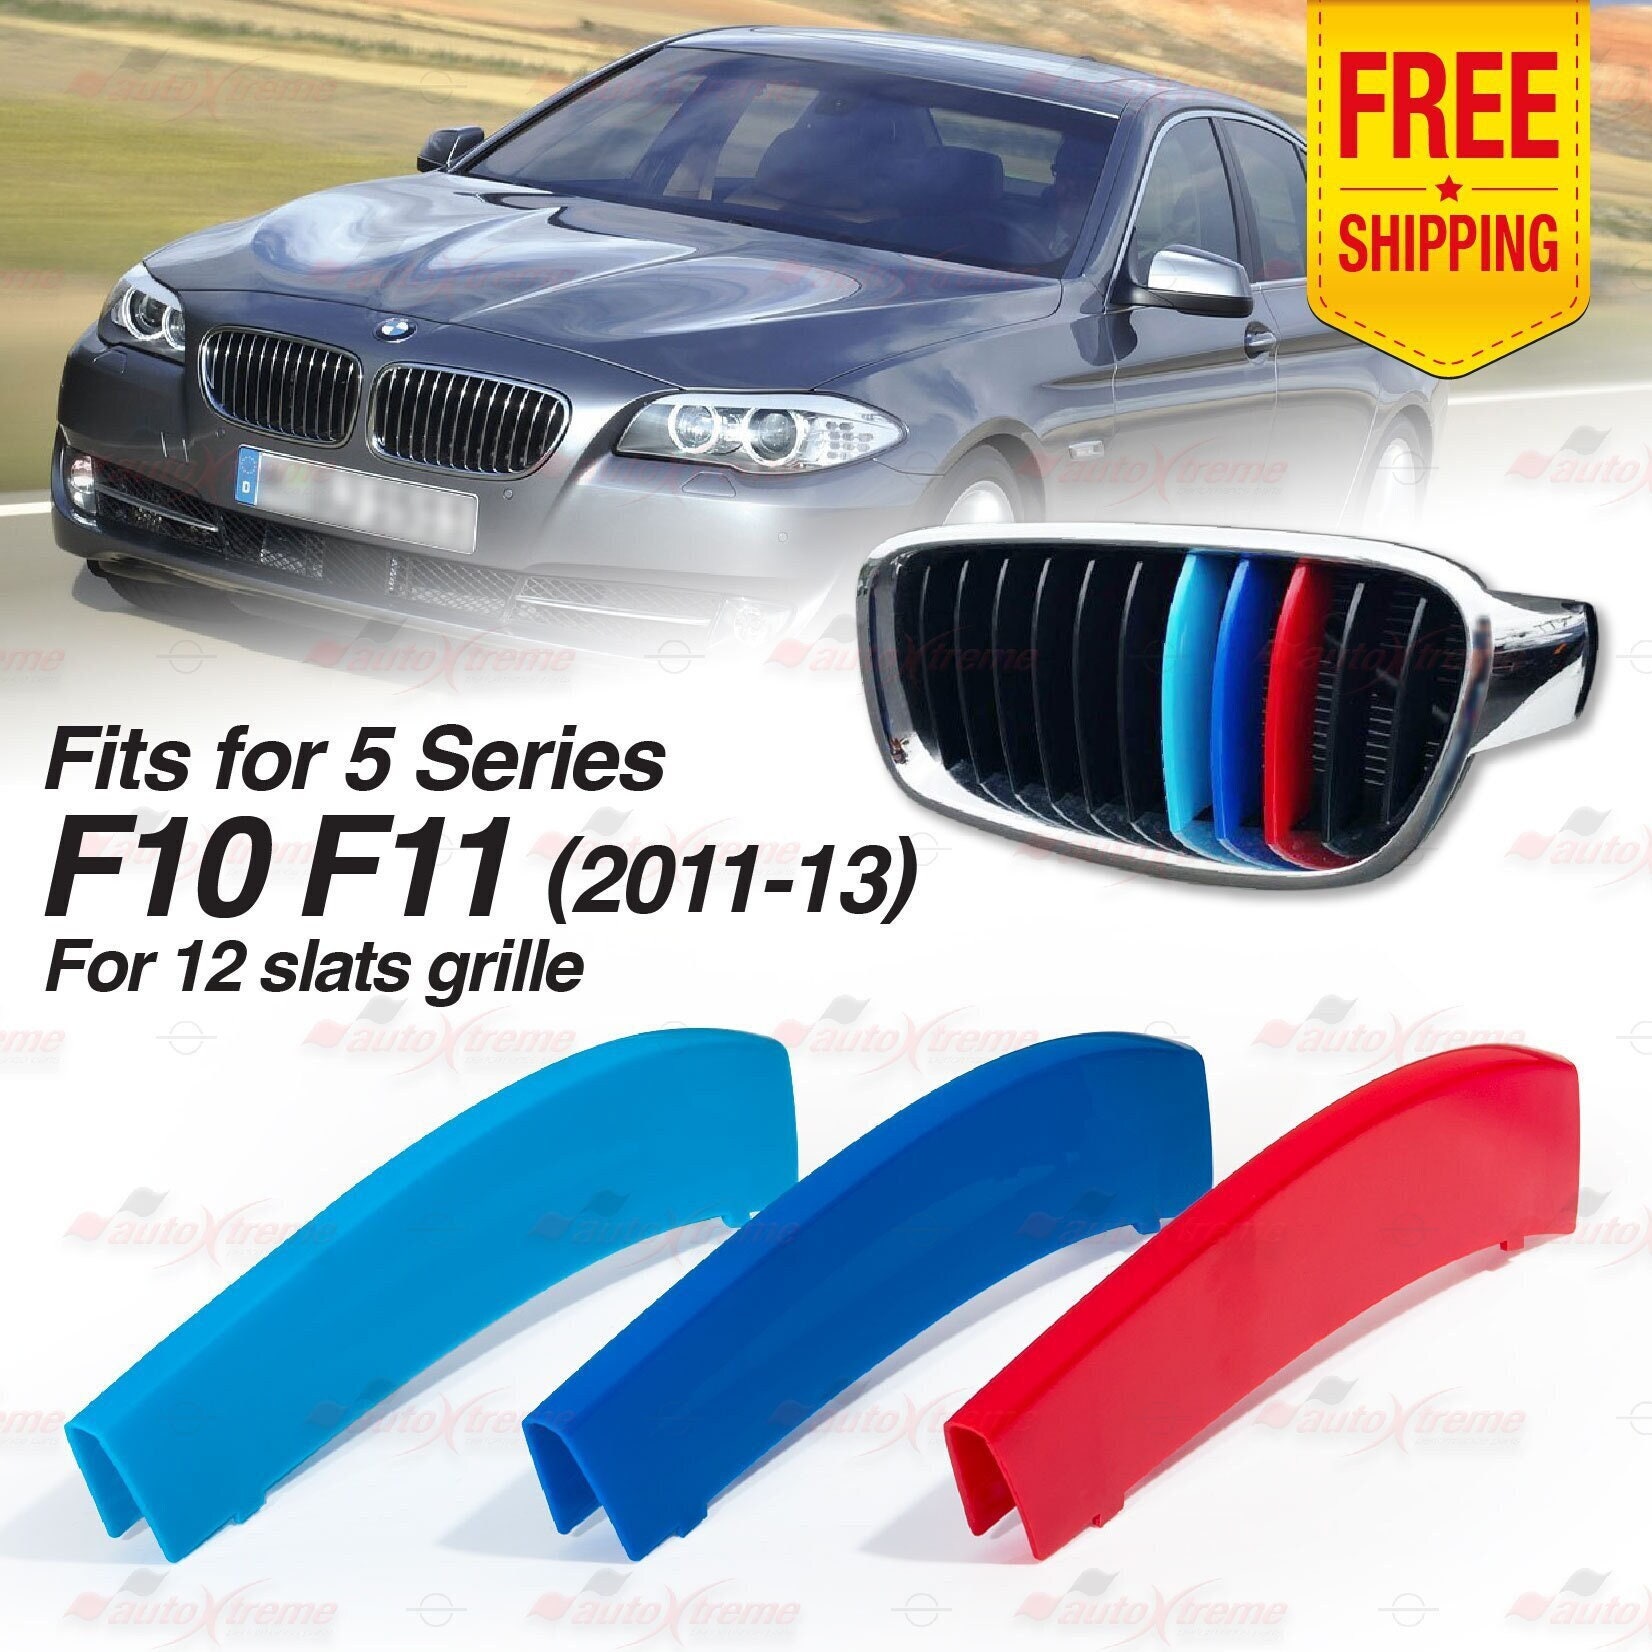 Tri-color 12 Bars Front Kidney Grille Sports Trim Cover Clips for BMW 5  Series F10 F11 2011-2013 Autoxtreme 